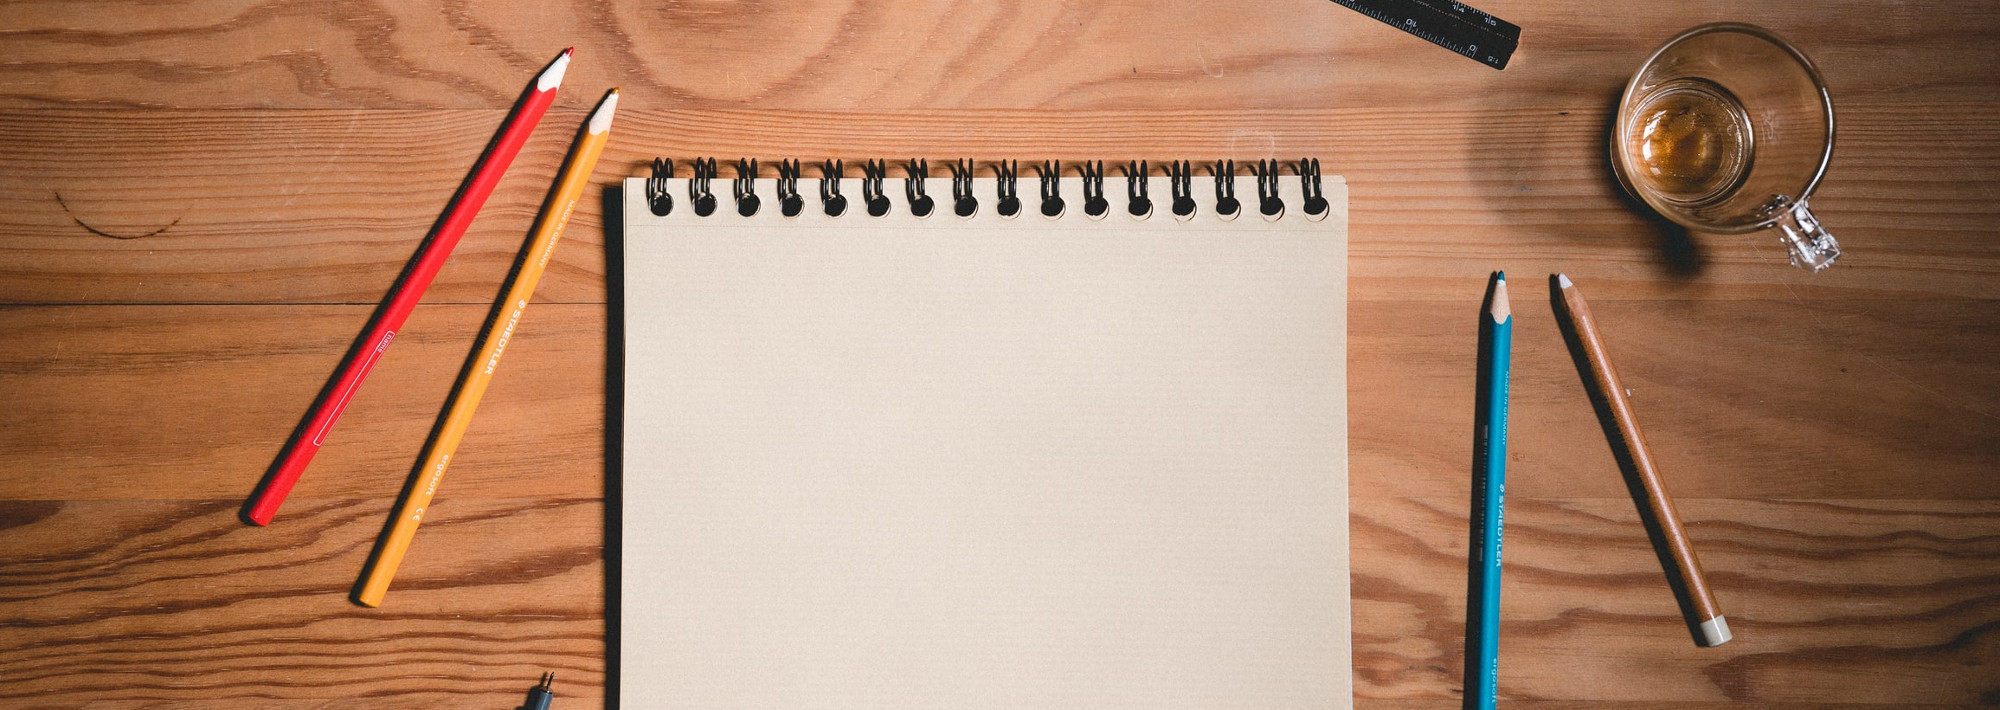 A notebook on a wooden table, with pencils around the notebook. The page is blank.